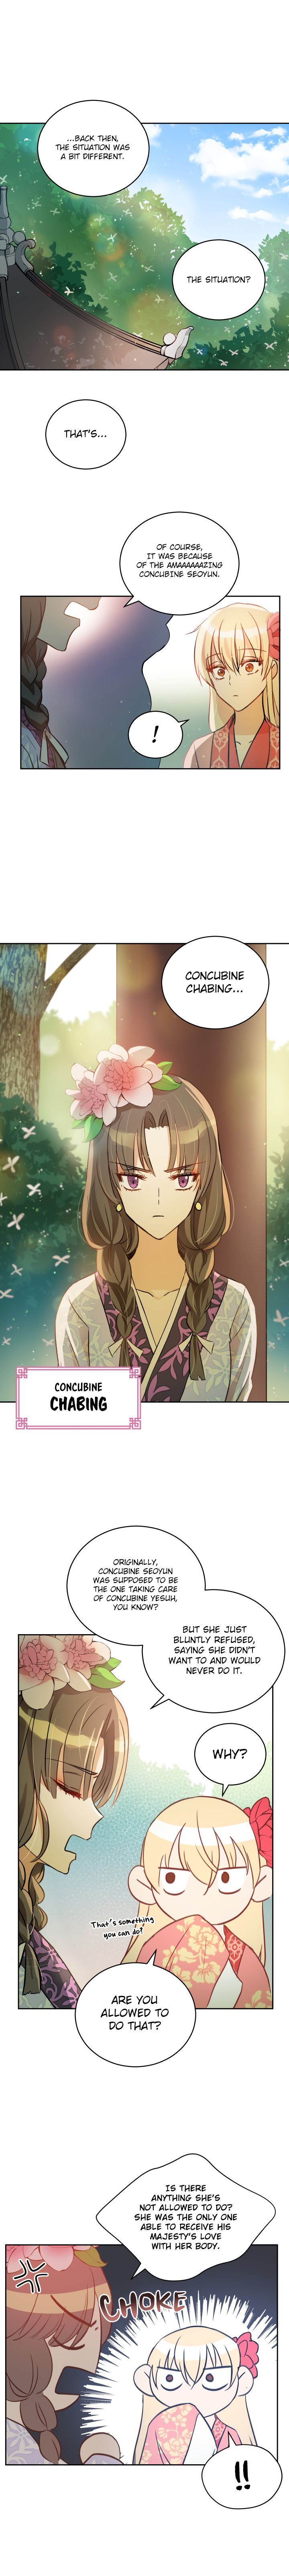 Contract Concubine Chapter 55 page 15